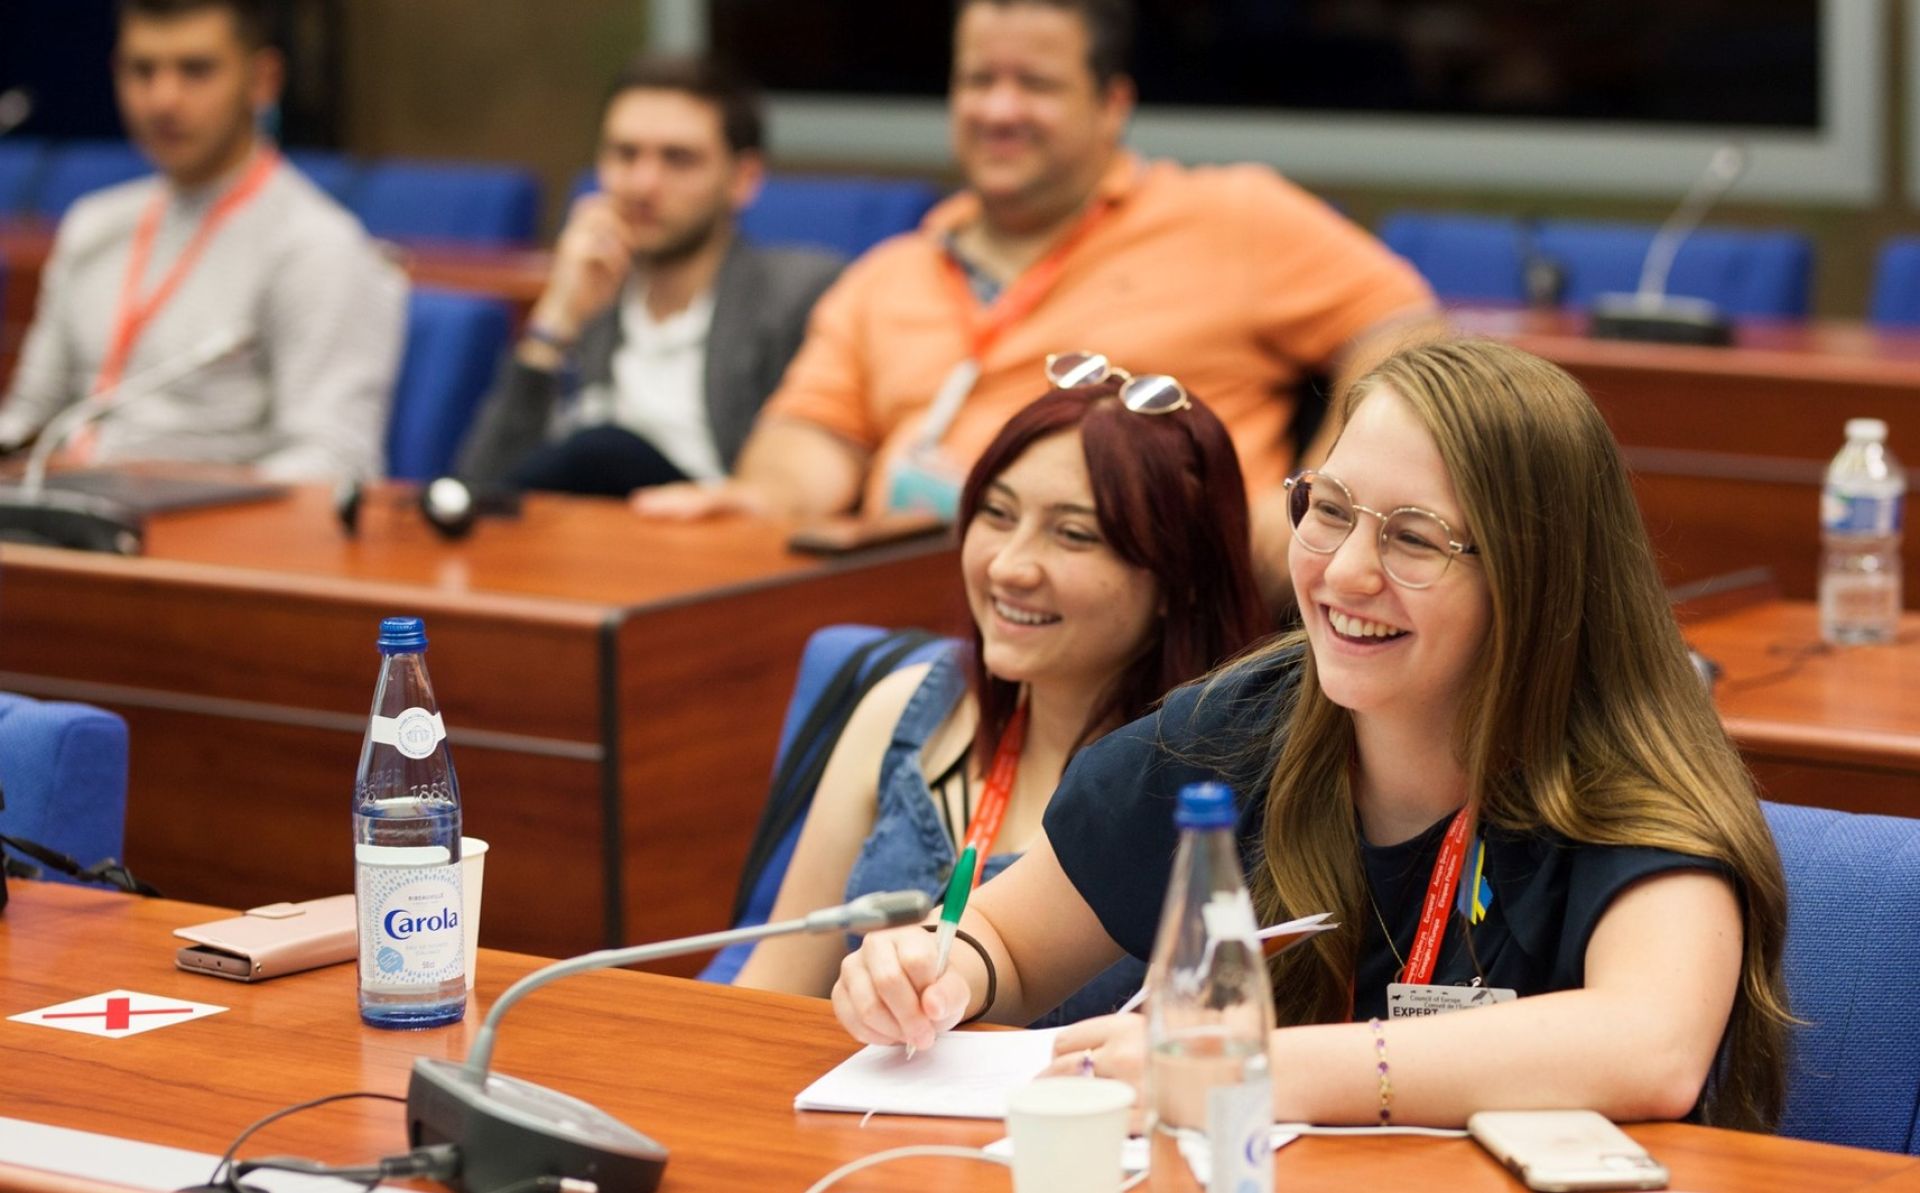 YEAs in EU: Youth Action Week at the Council of Europe